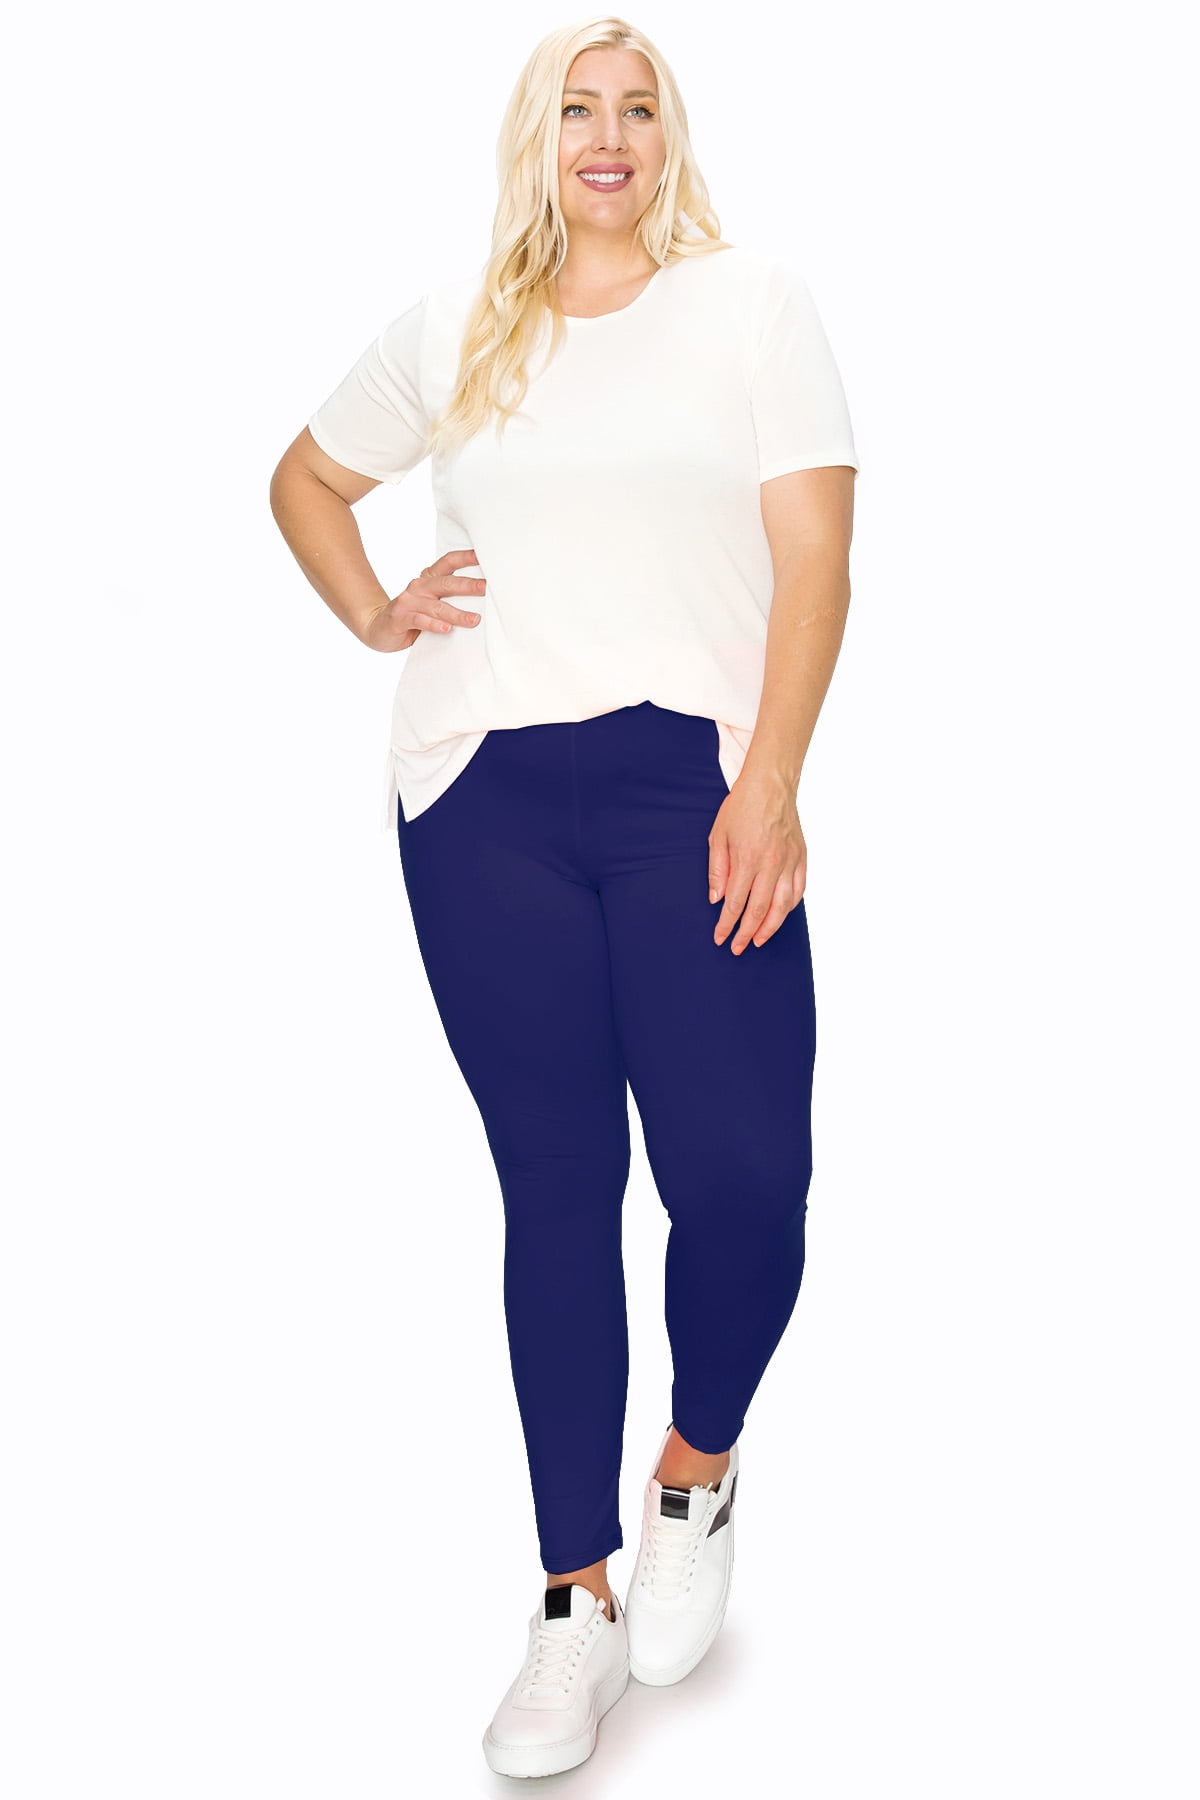 Plus Size Solid High Rise Waistband Leggings - Navy